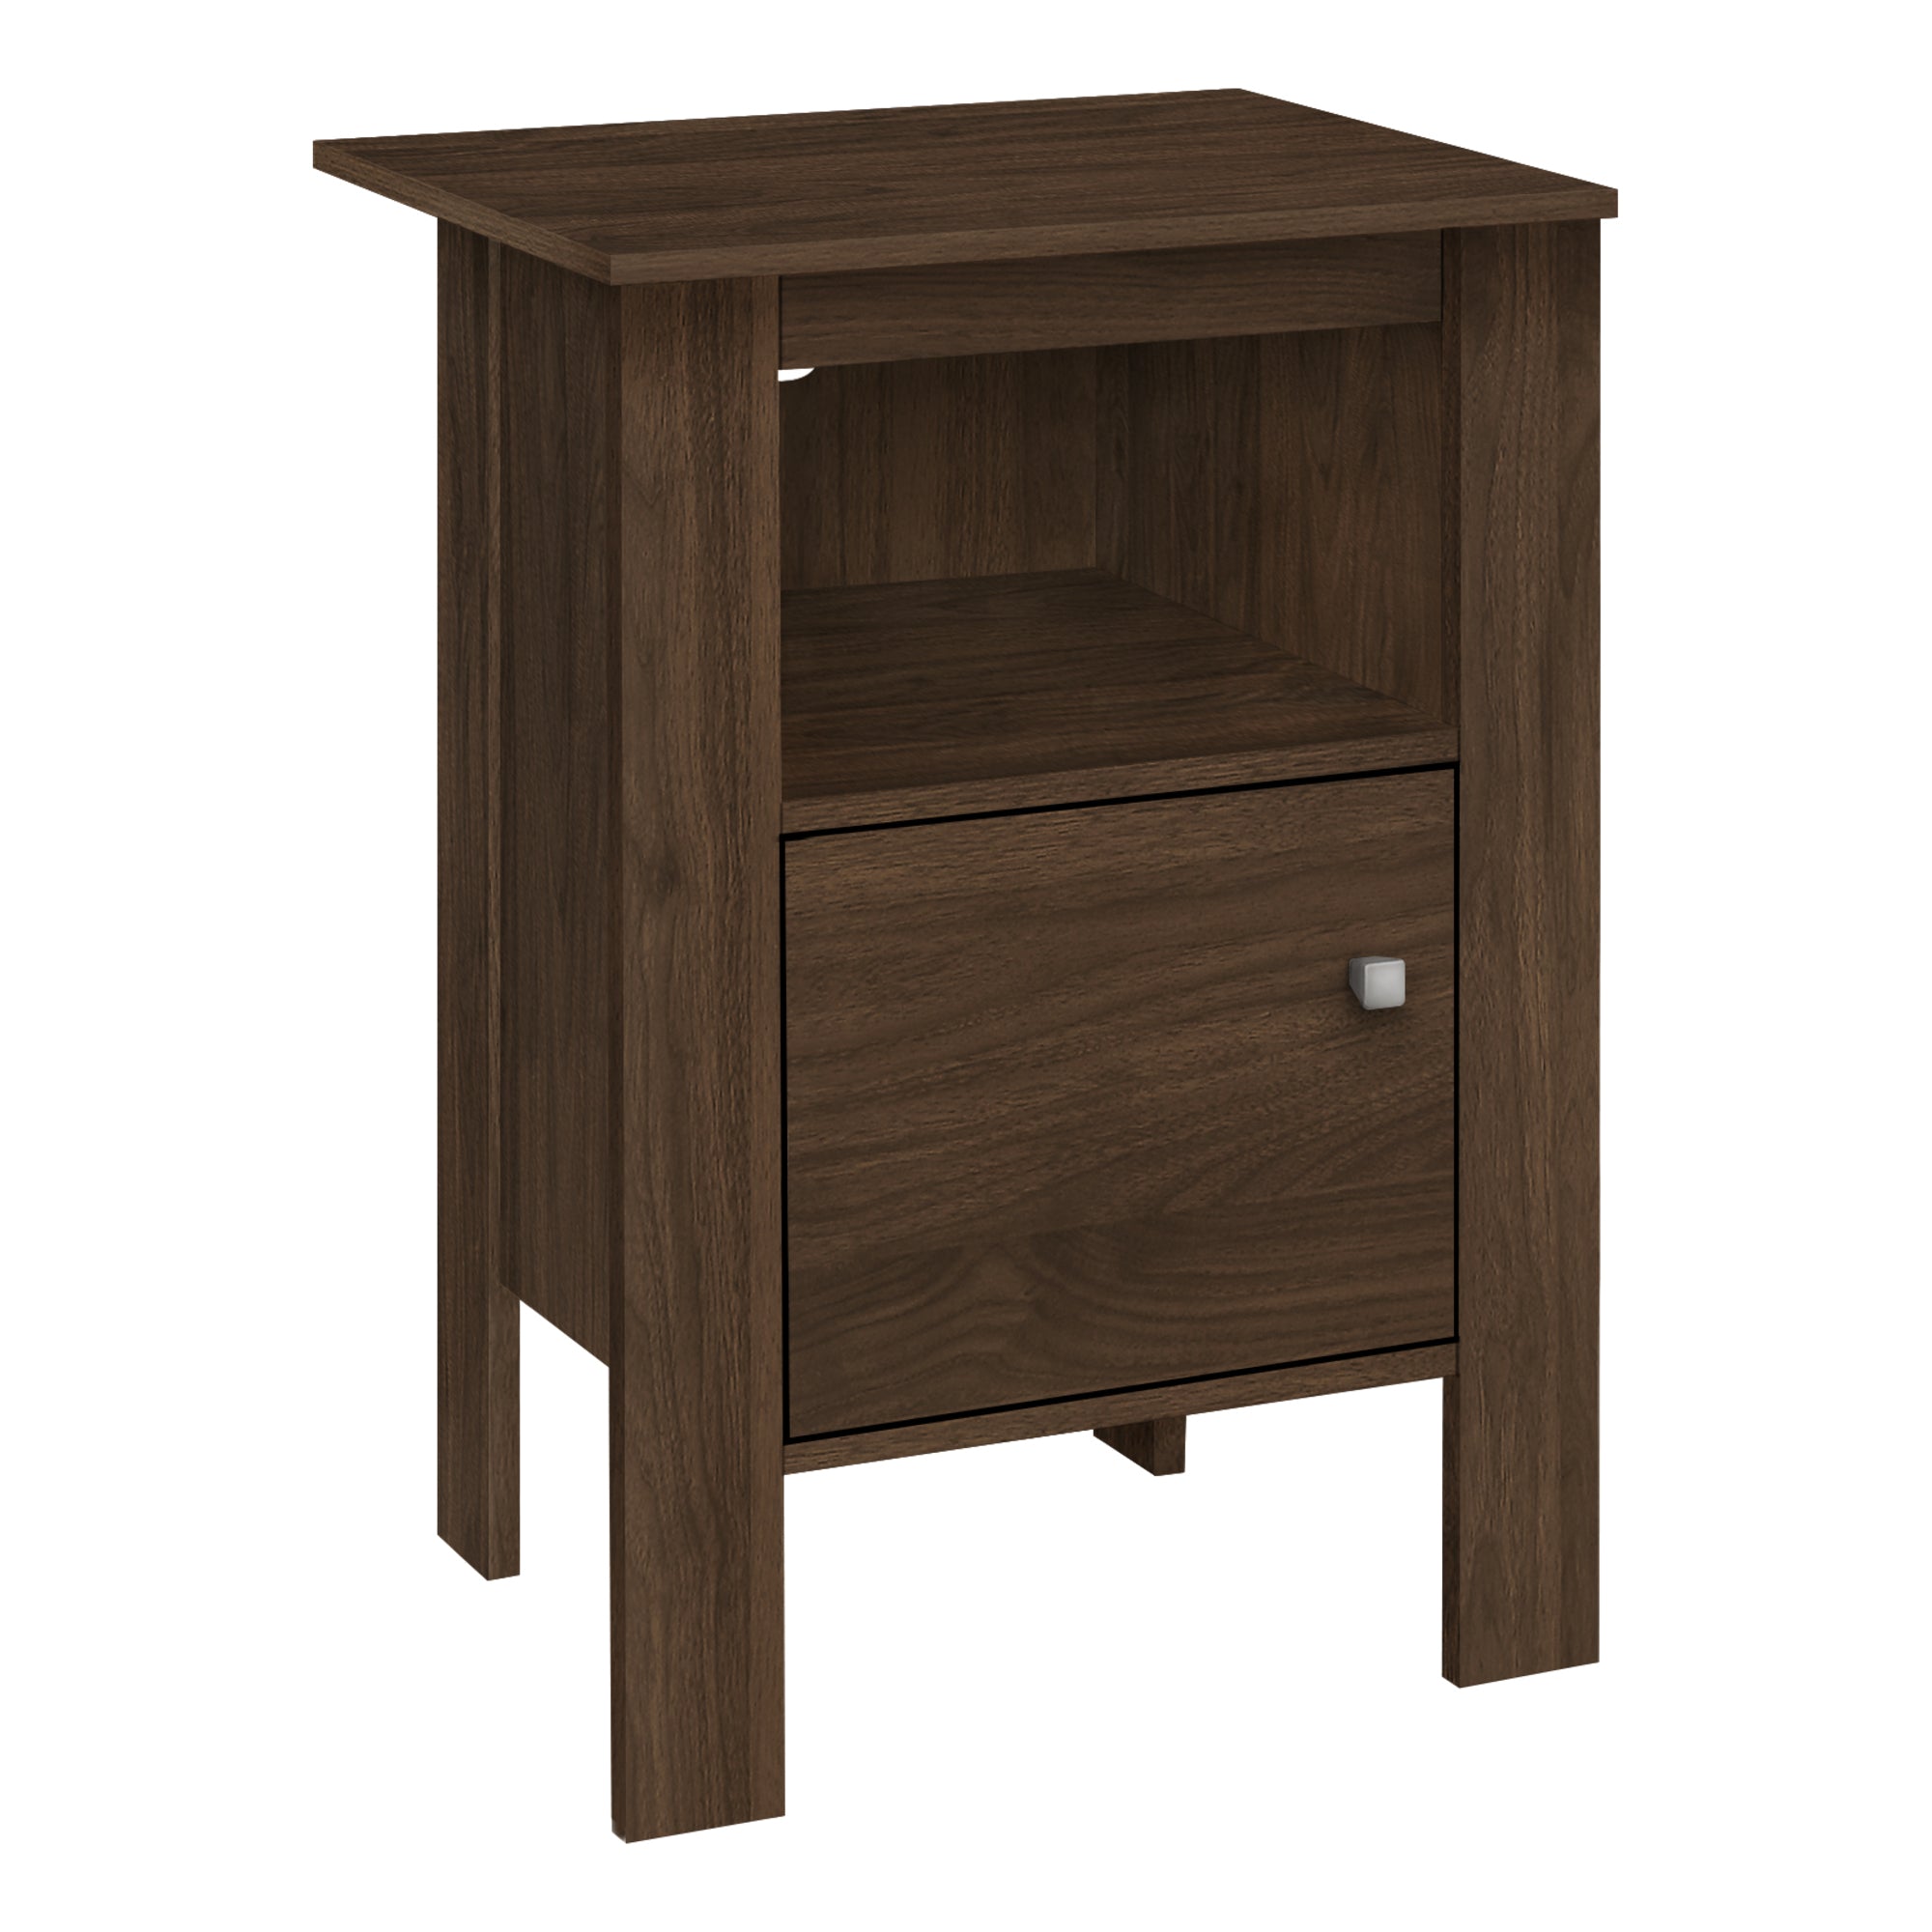 MN-232144    Accent Table, Side, End, Nightstand, Lamp, Living Room, Bedroom, Laminate, Walnut, Contemporary, Modern